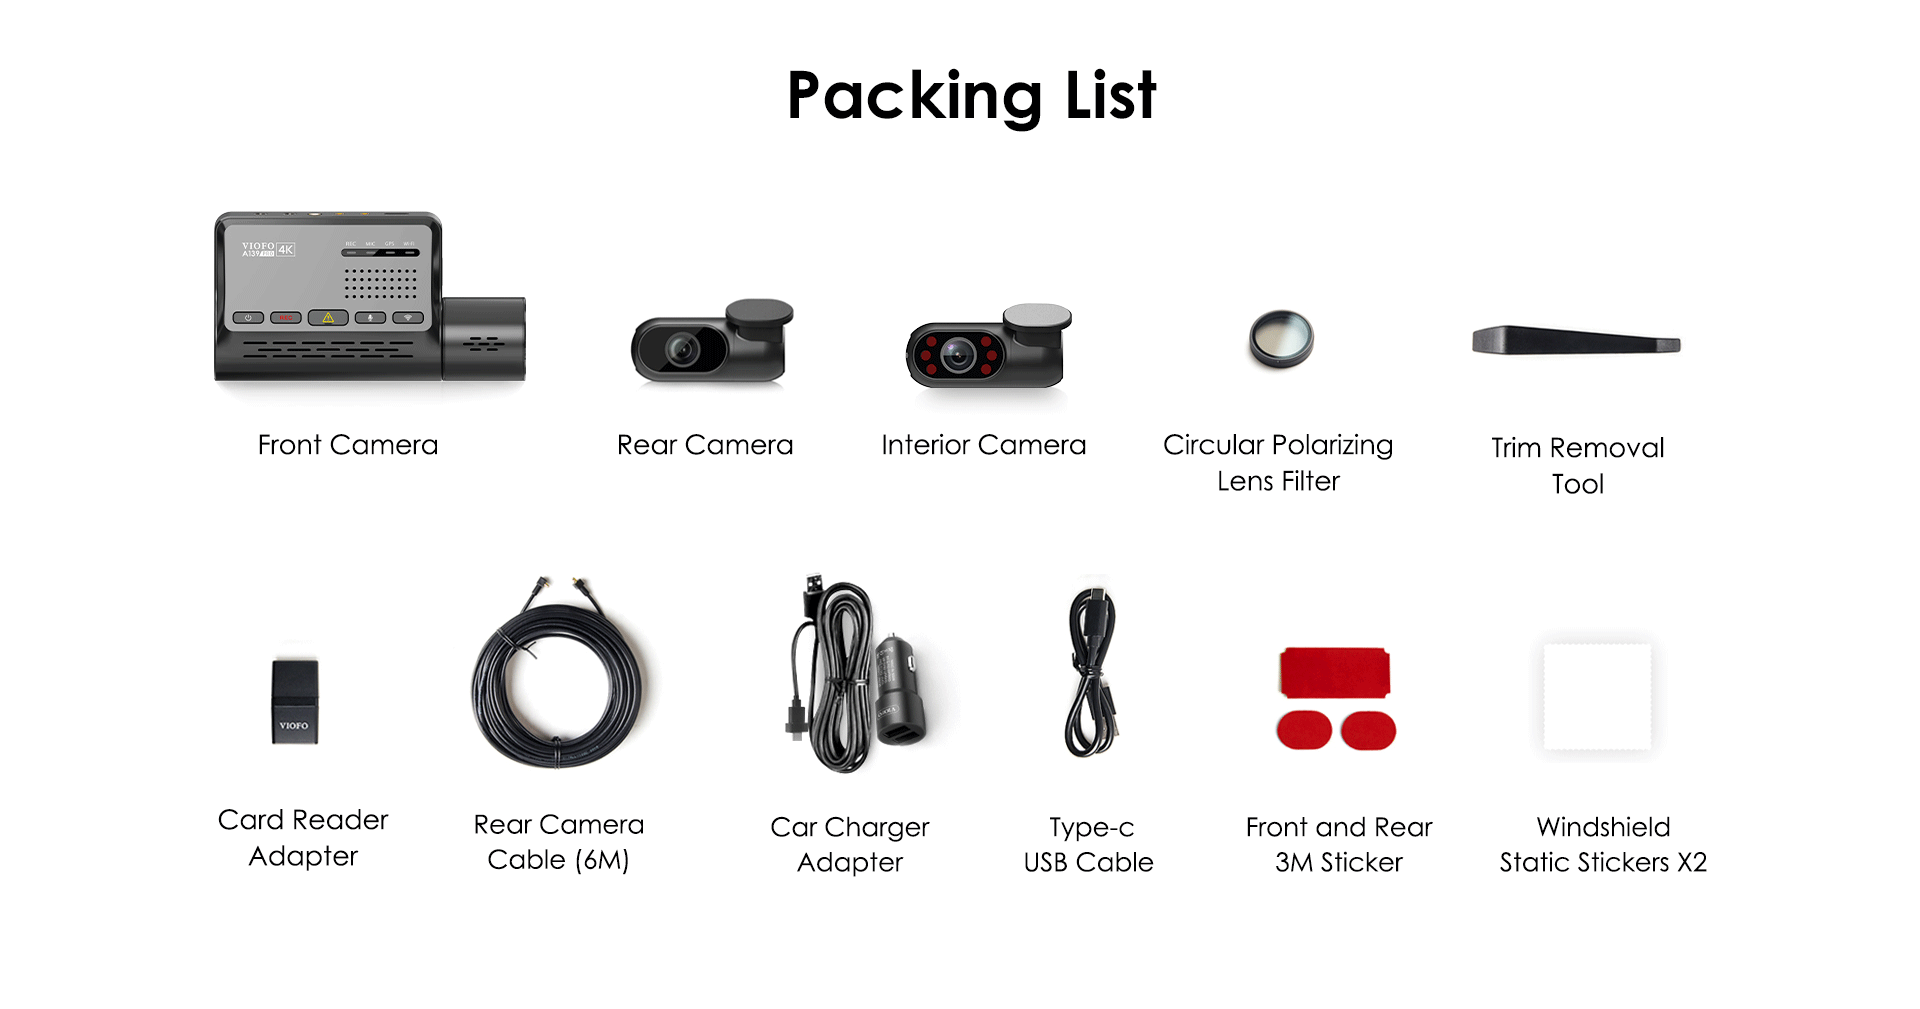 The Viofo A139 Pro Packaging List